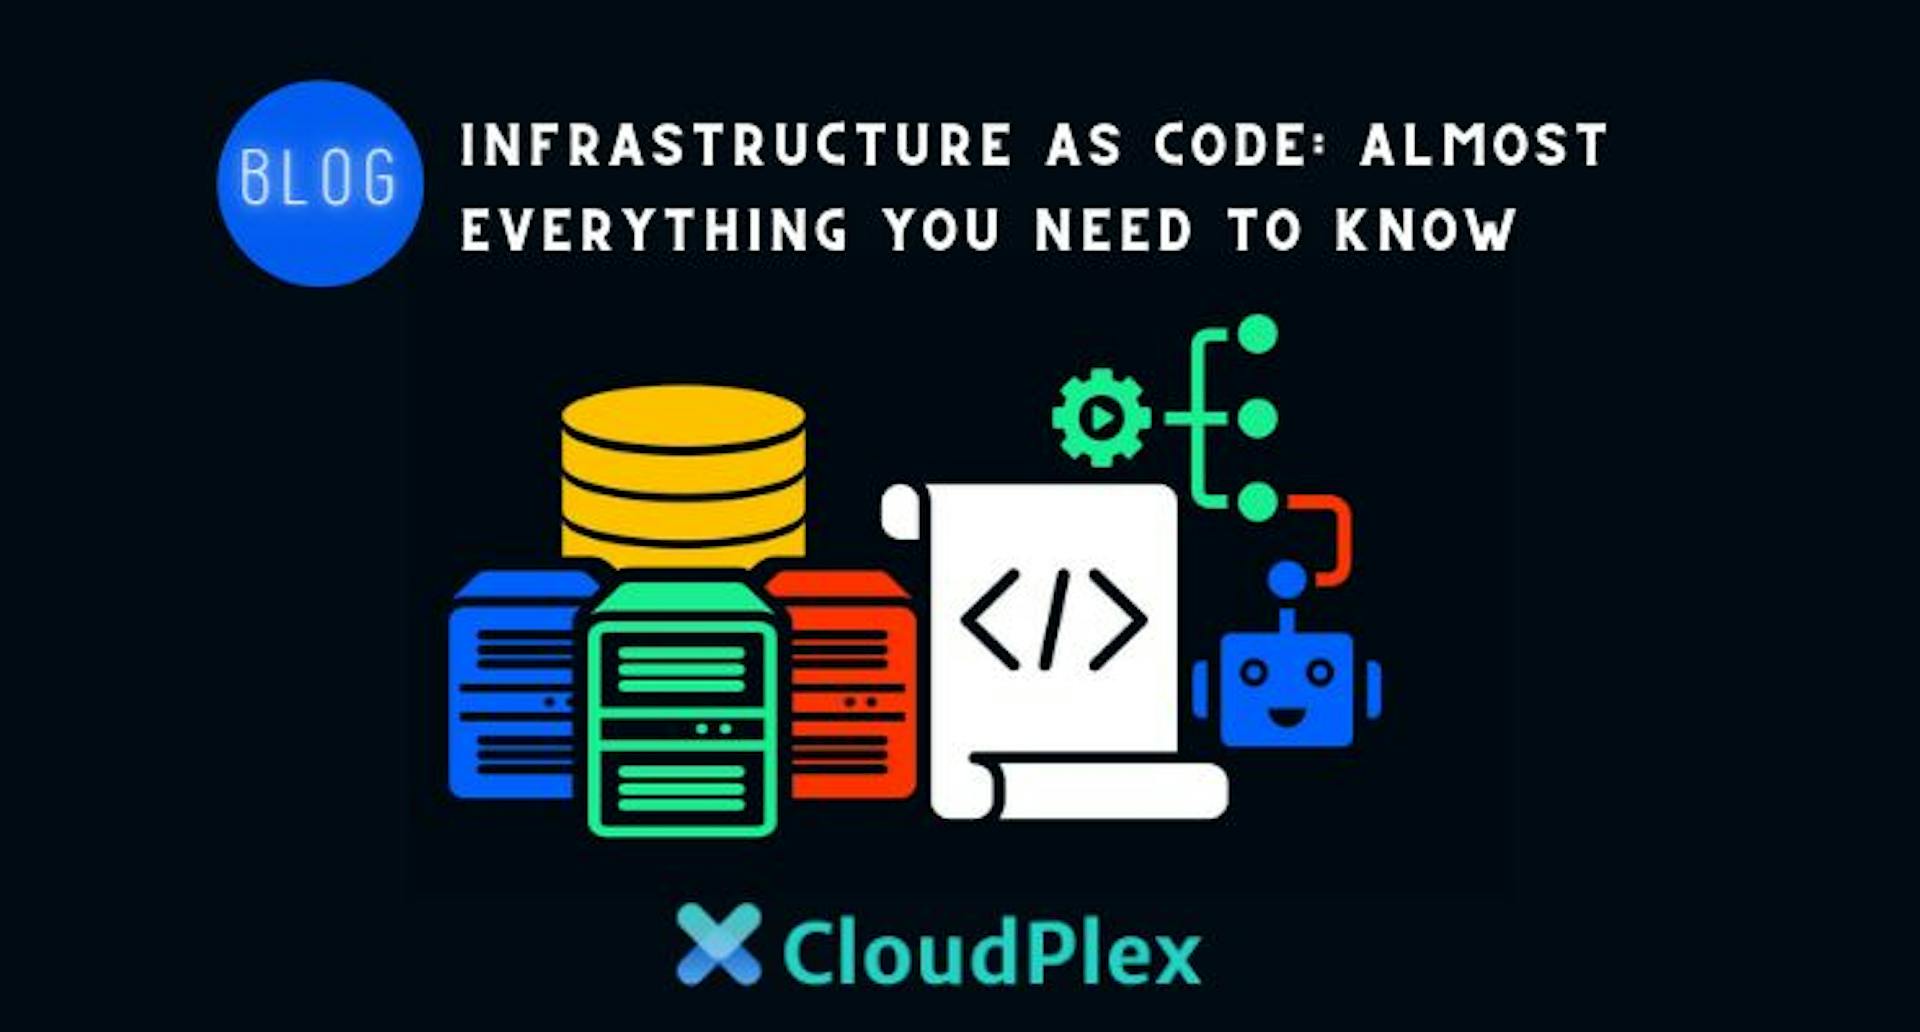 featured image - Infrastructure as Code: Almost Everything You Need to Know